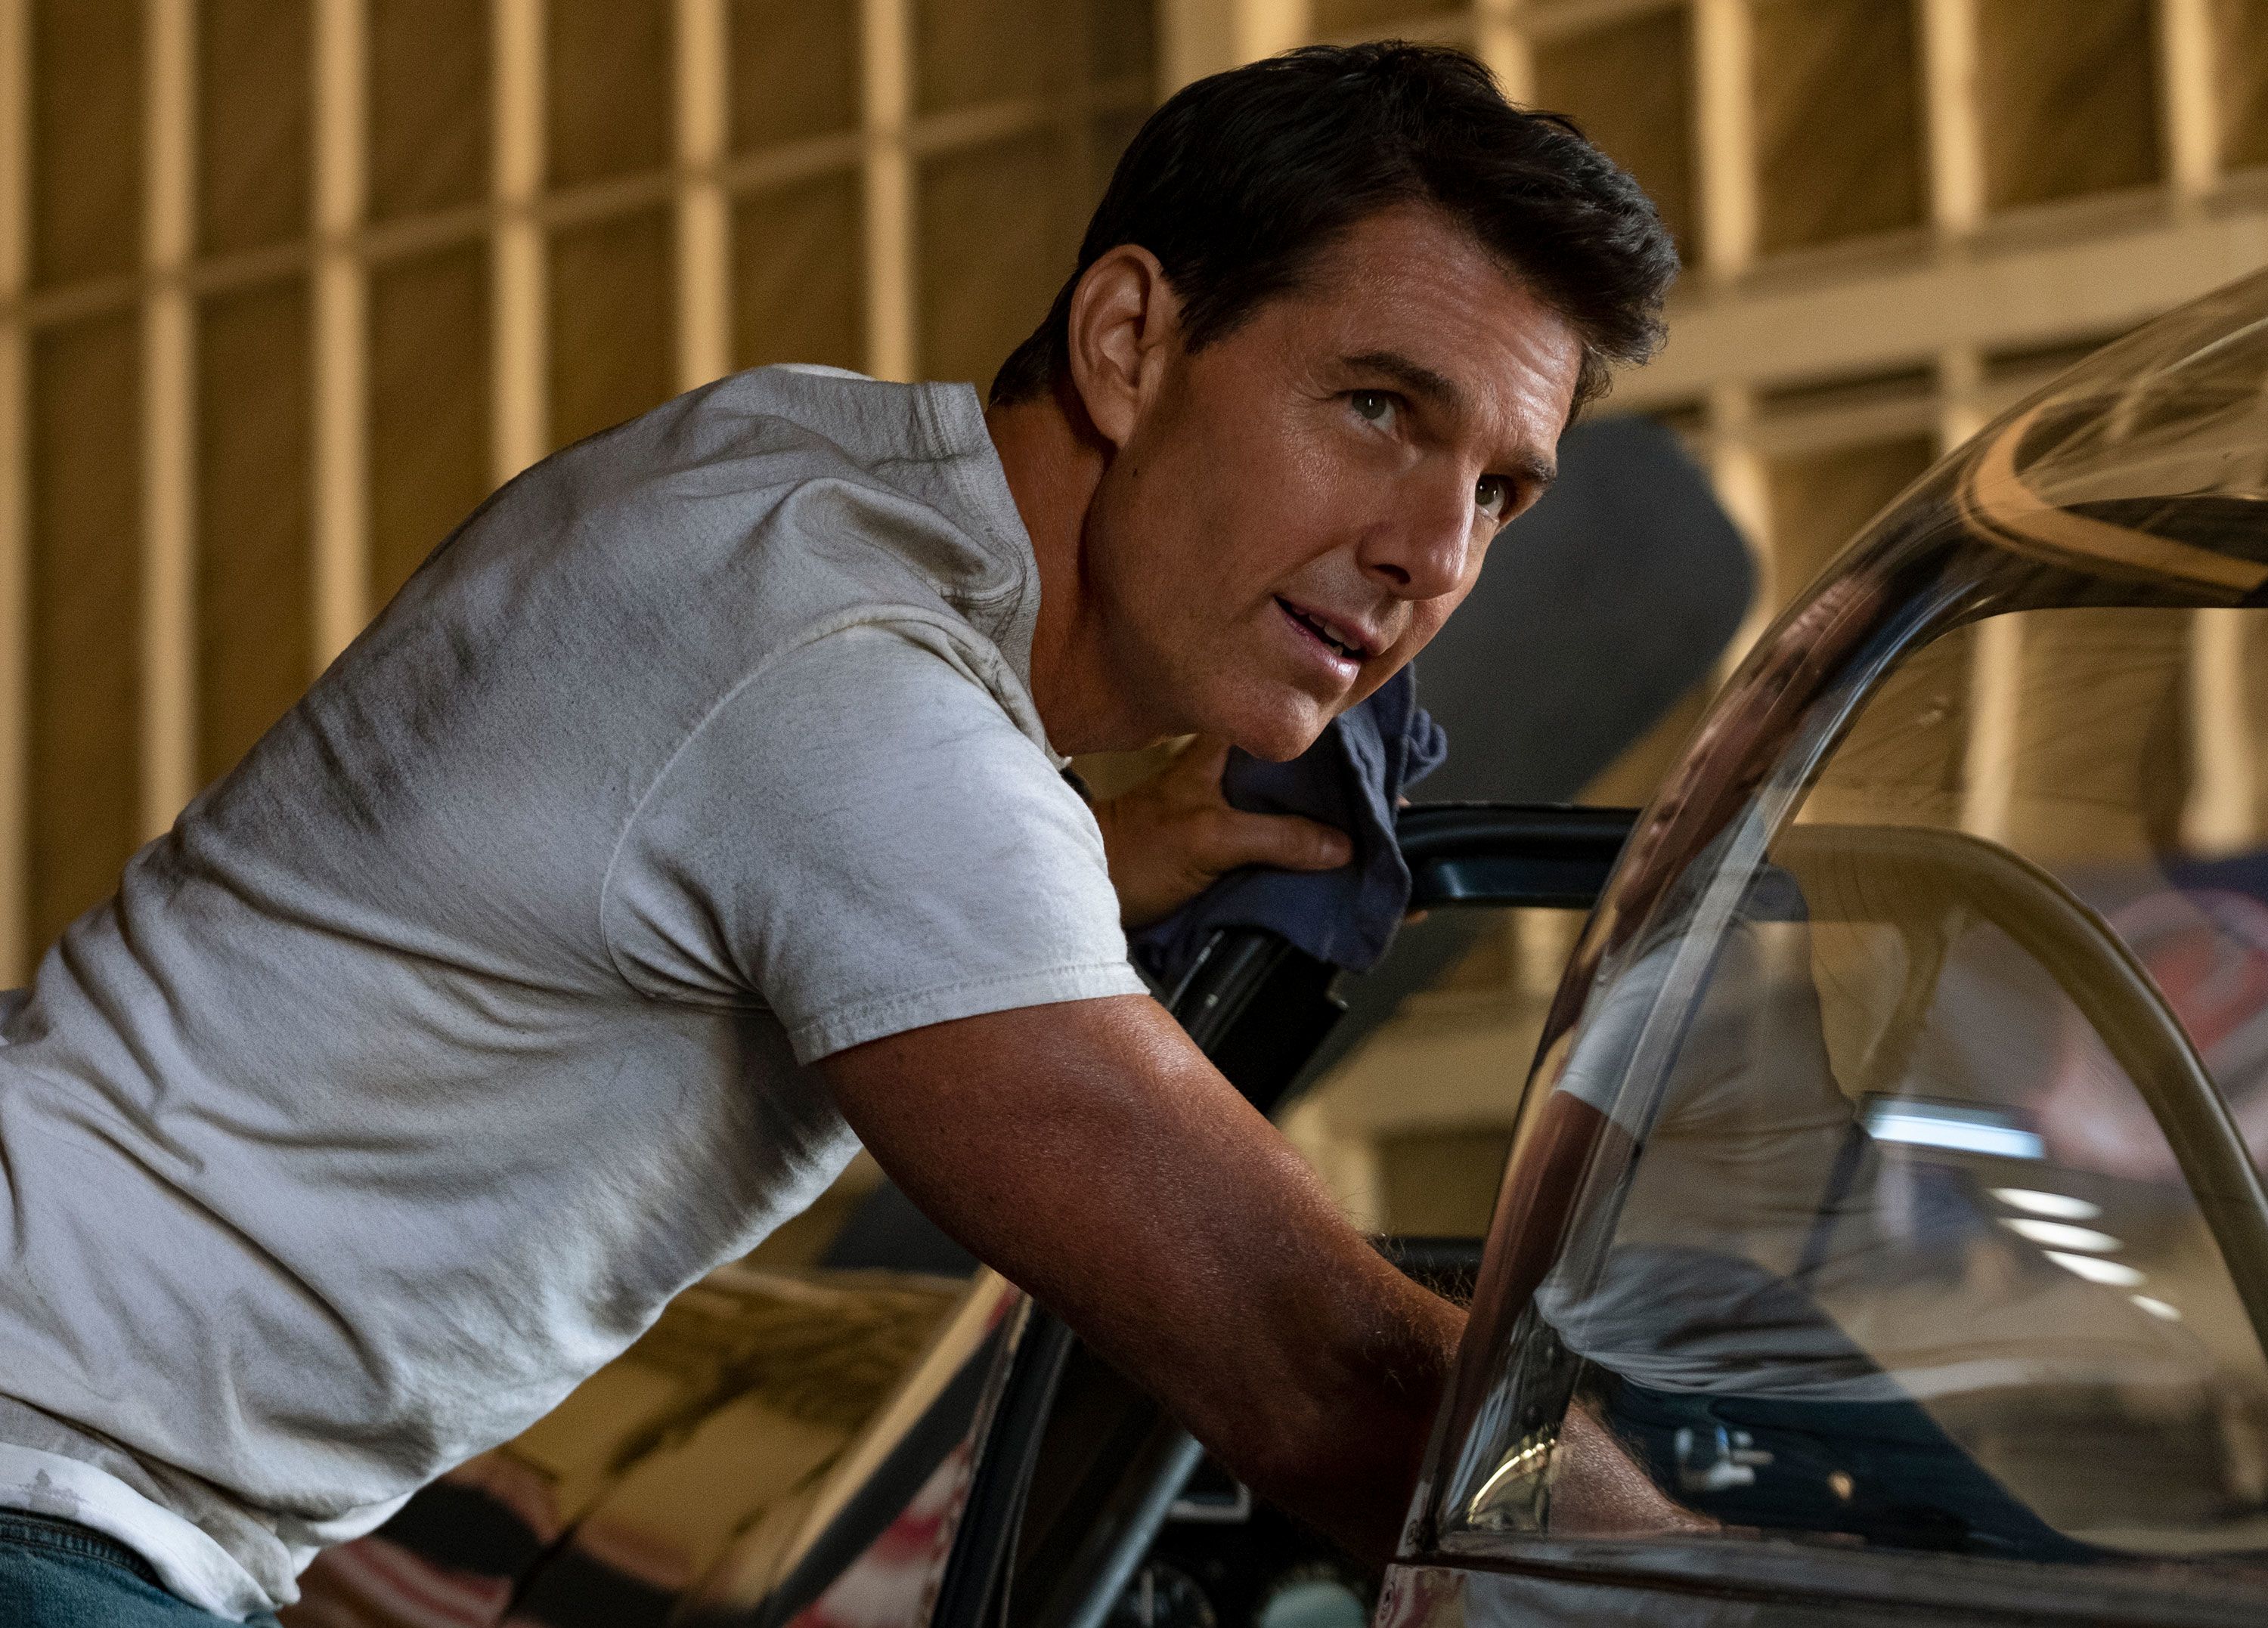 Top Gun 3' in early development with Tom Cruise at Paramount